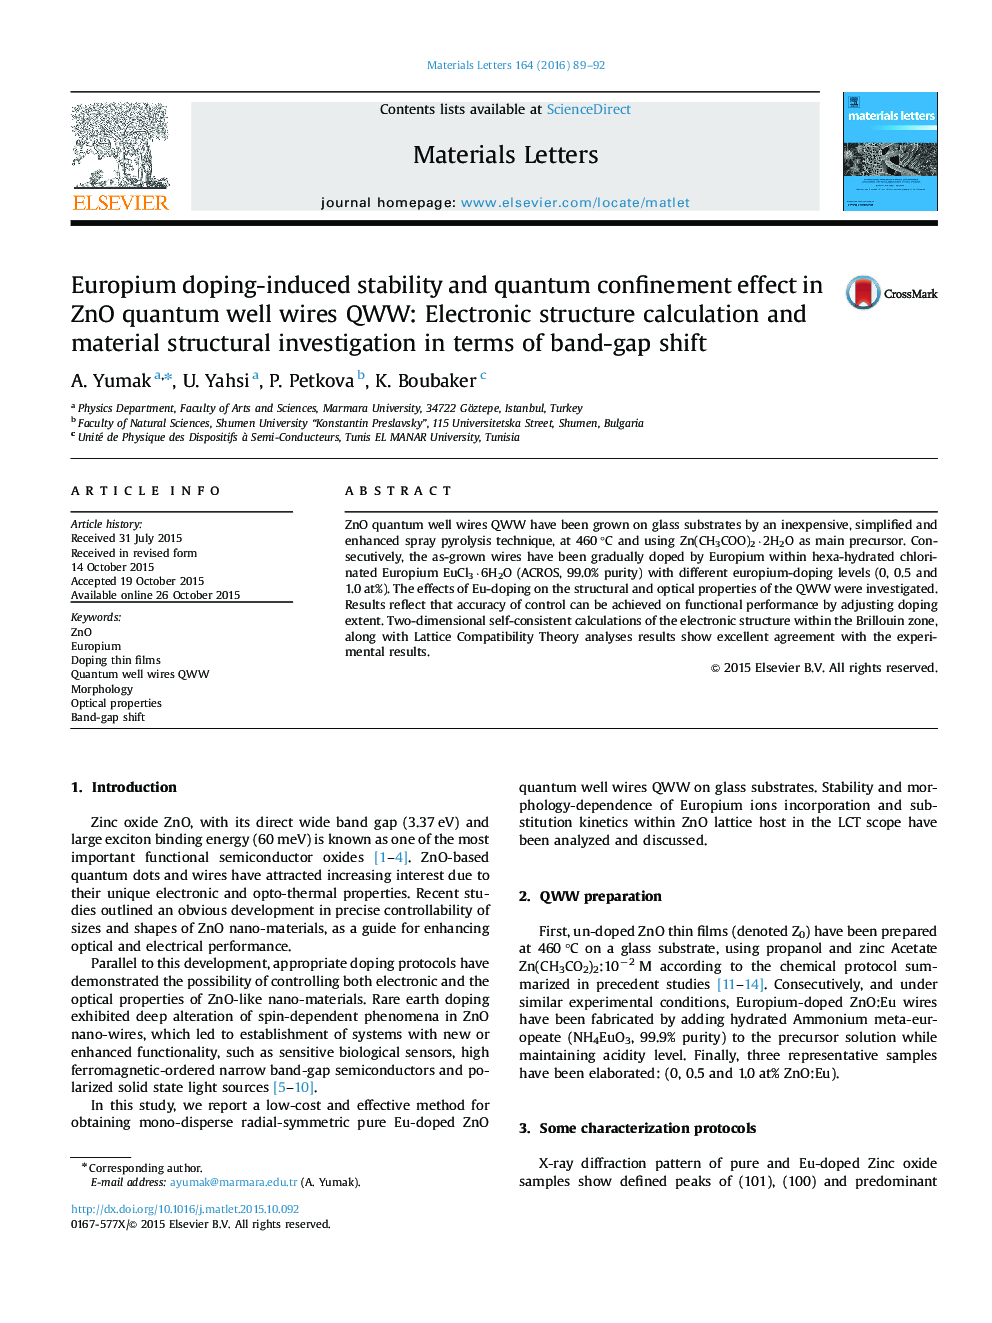 Europium doping-induced stability and quantum confinement effect in ZnO quantum well wires QWW: Electronic structure calculation and material structural investigation in terms of band-gap shift